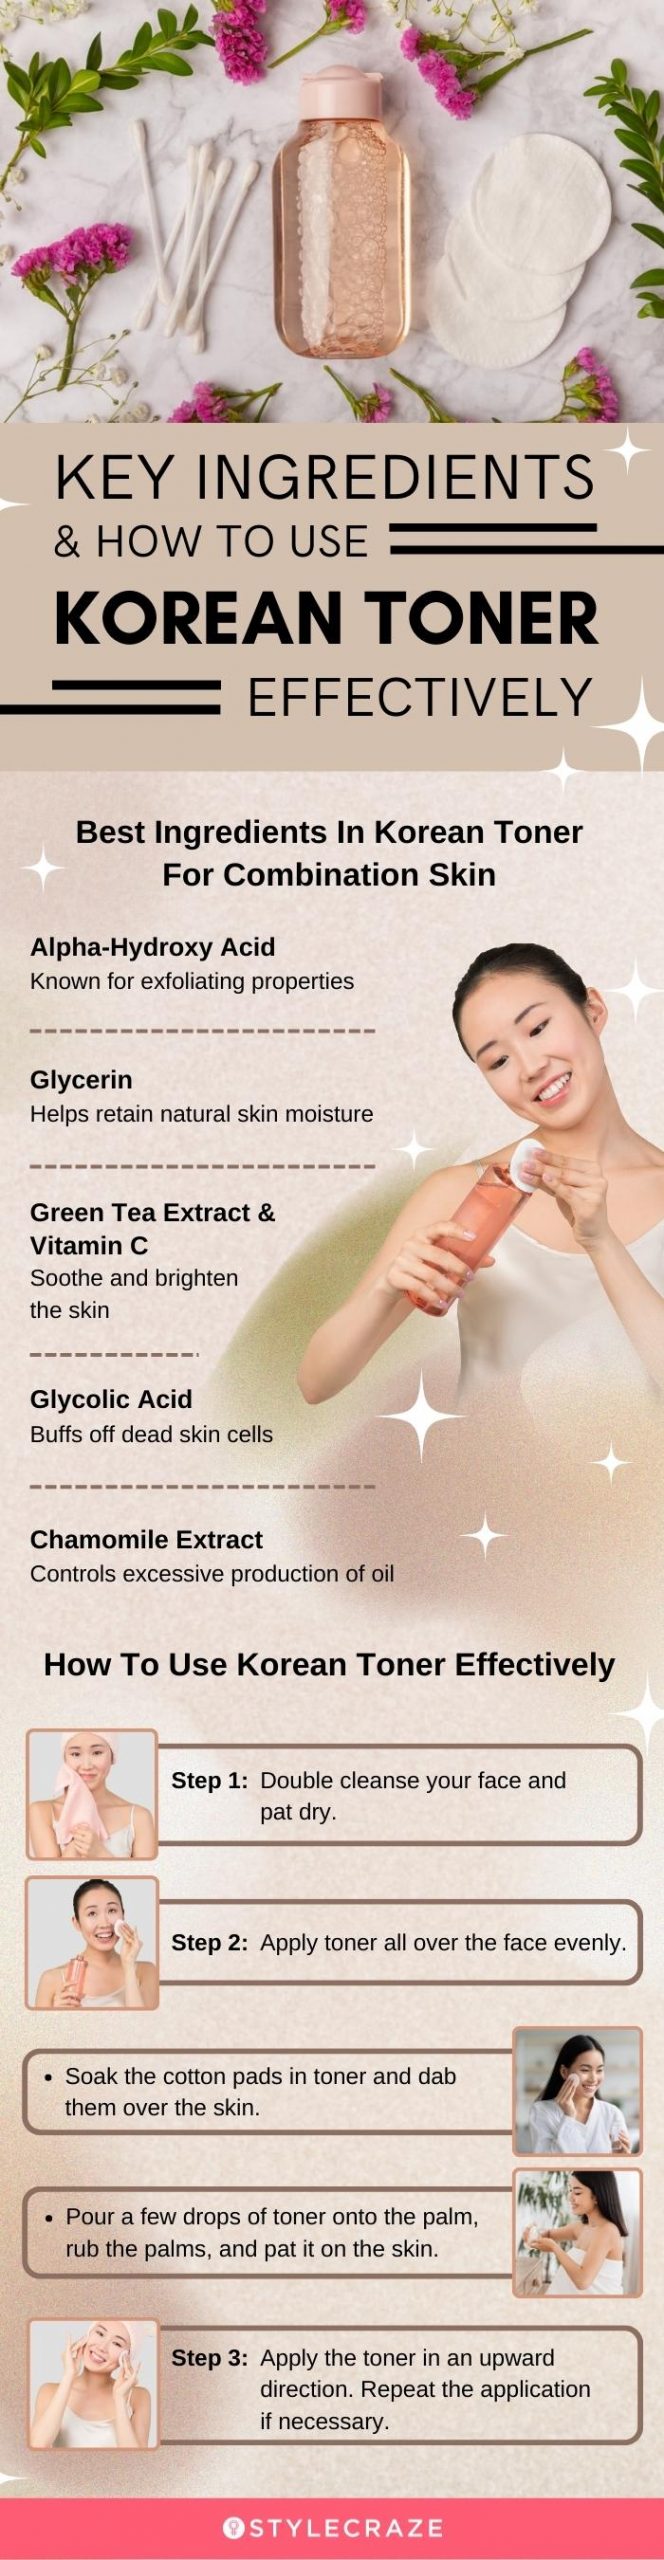 Key Ingredients & How To Use Korean Toner Effectively (infographic)